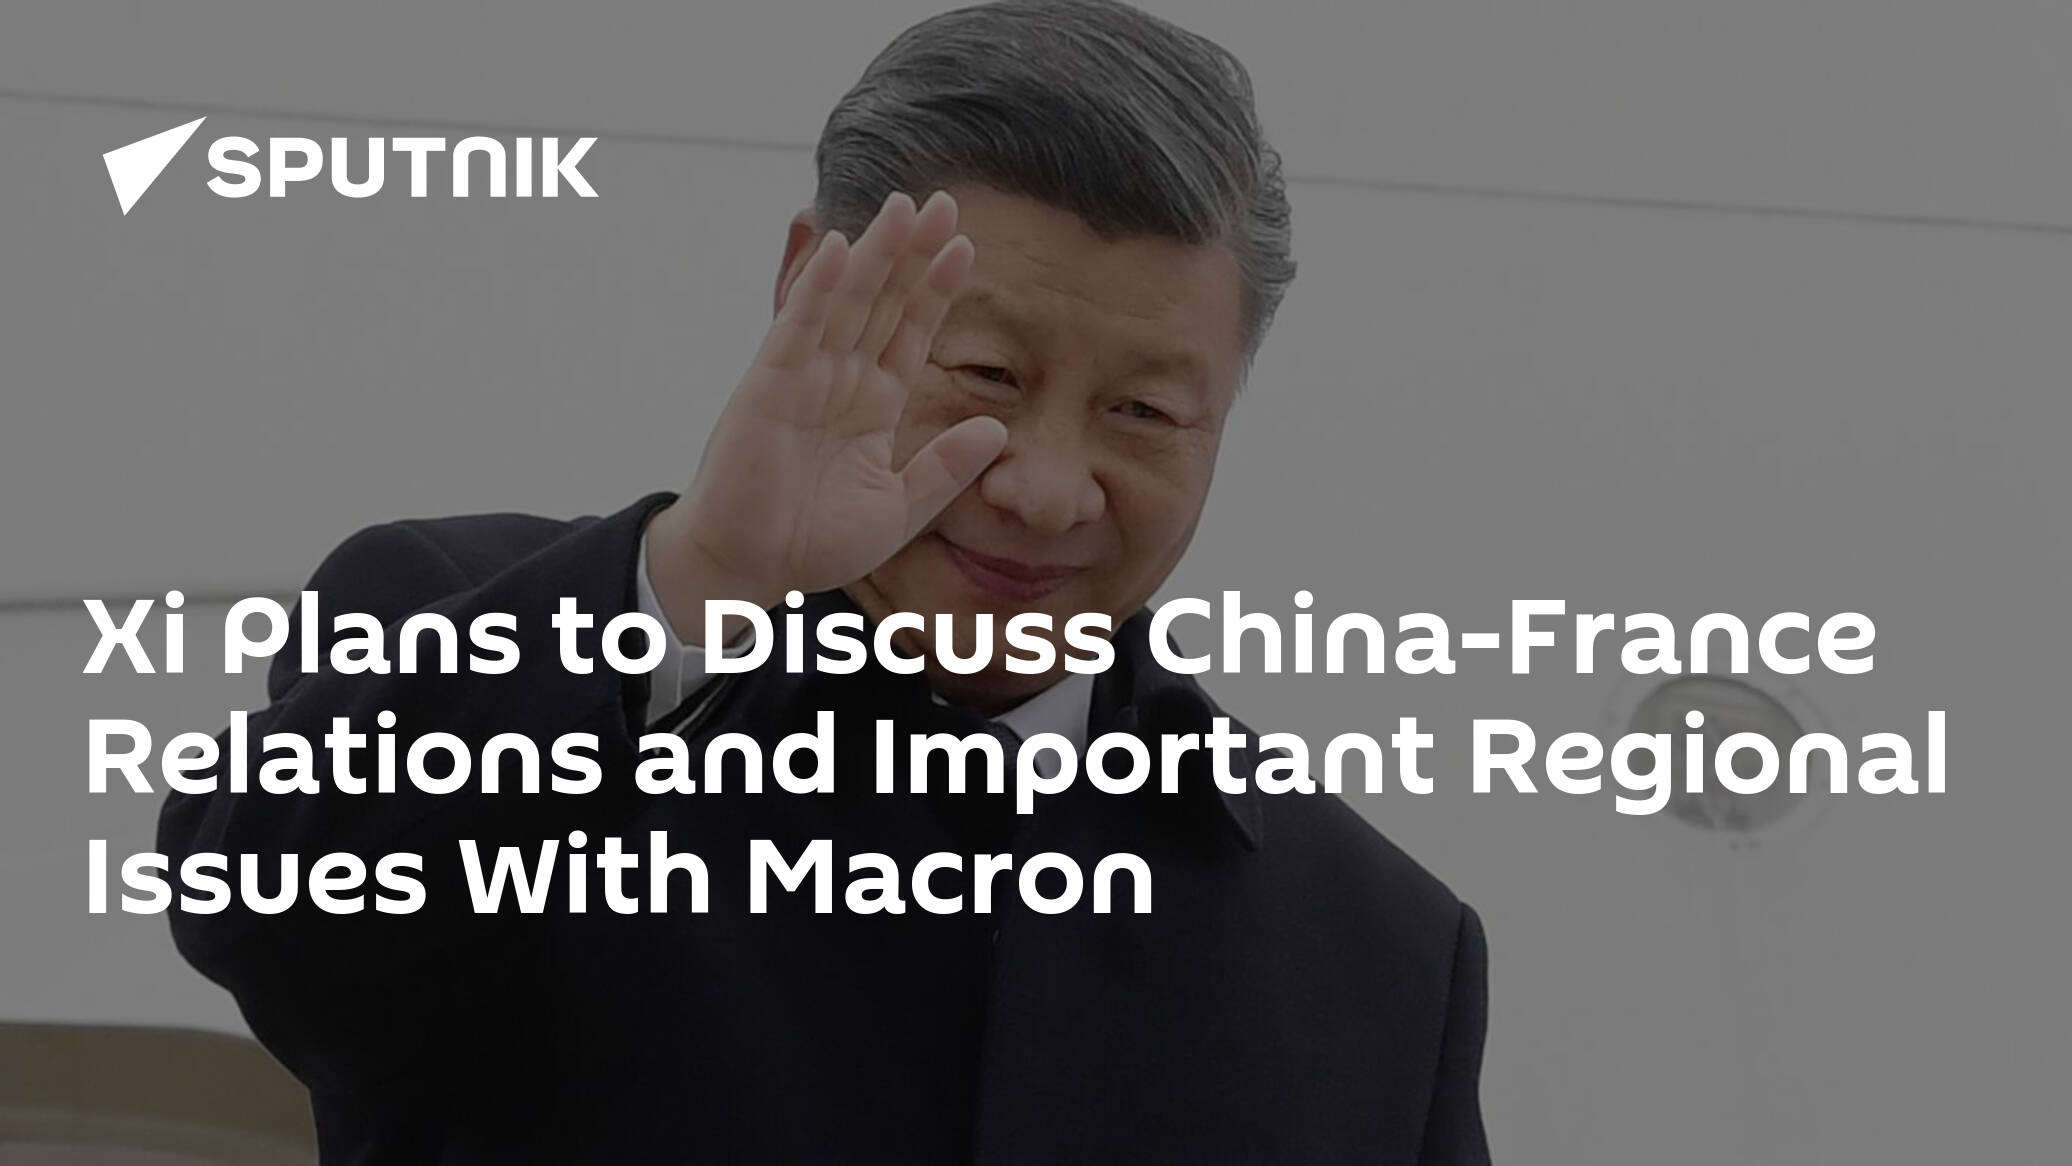 Xi Plans to Discuss China-France Relations and Important Regional Issues With Macron